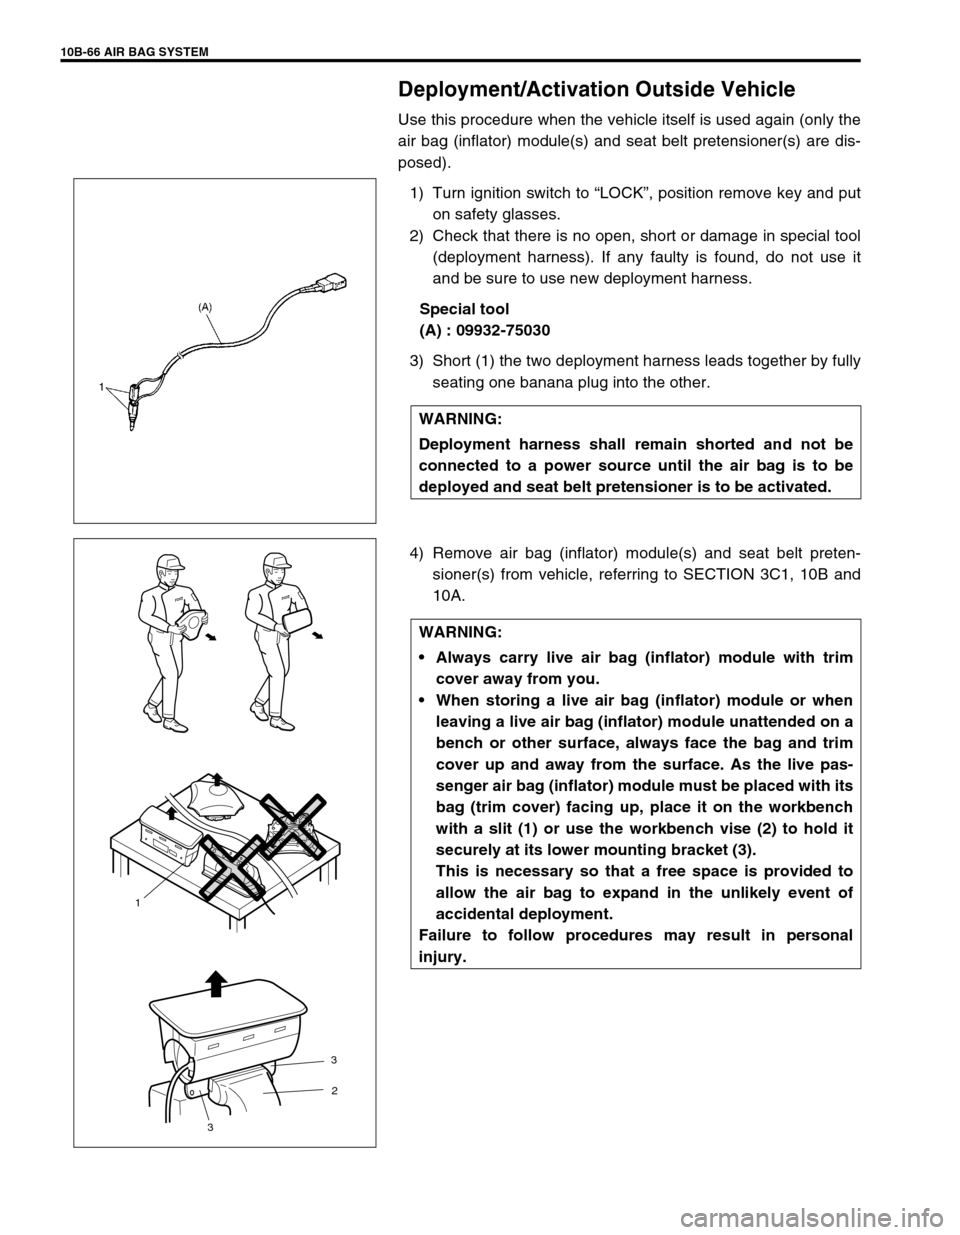 SUZUKI GRAND VITARA 1999 2.G Owners Manual 10B-66 AIR BAG SYSTEM
Deployment/Activation Outside Vehicle
Use this procedure when the vehicle itself is used again (only the
air bag (inflator) module(s) and seat belt pretensioner(s) are dis-
posed